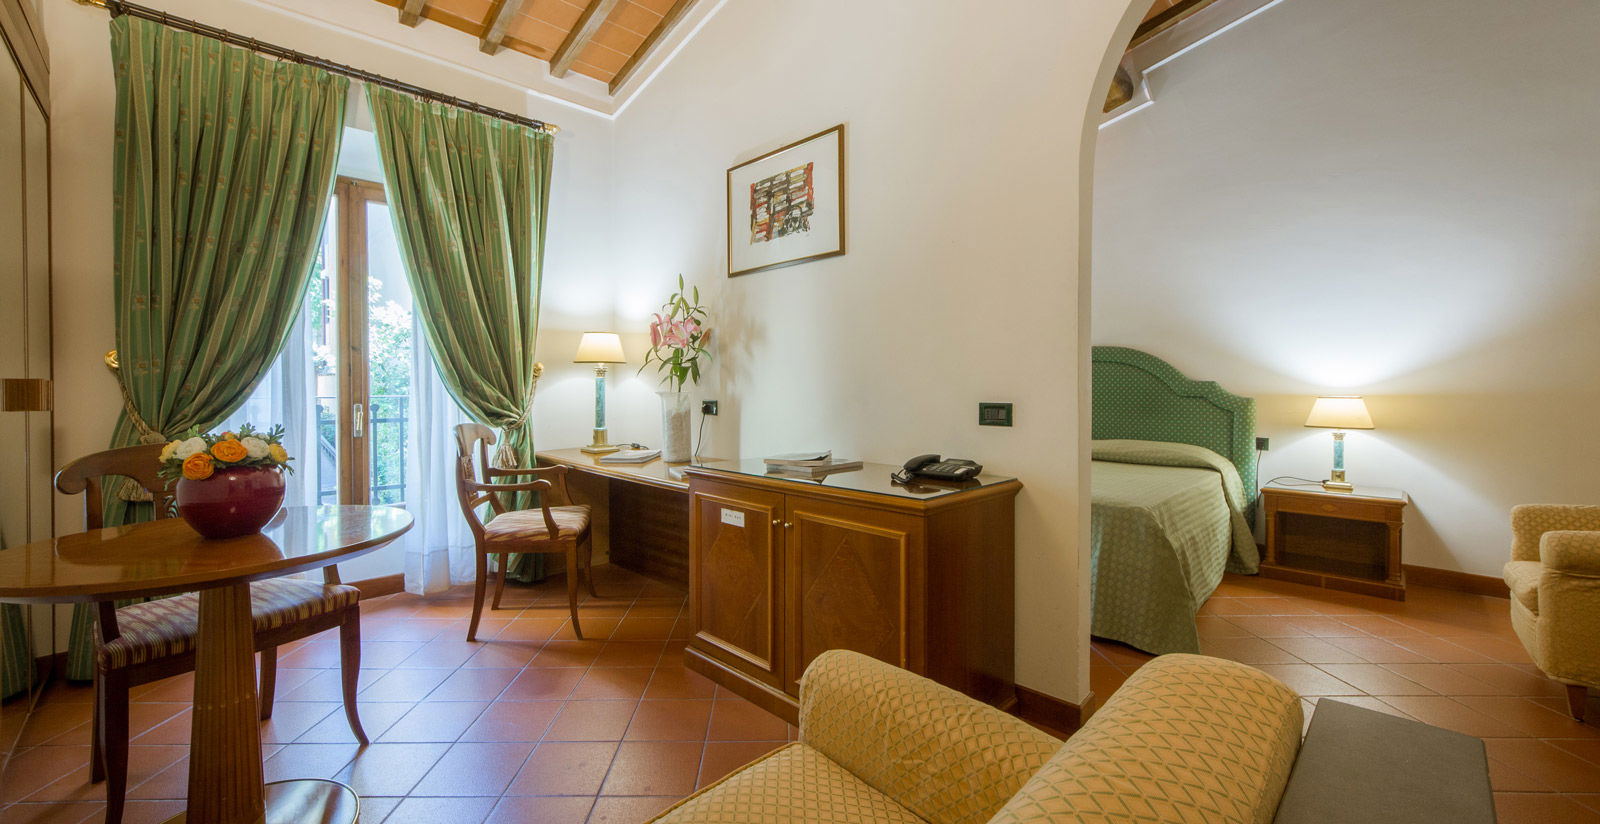 Where to stay in the center of Rome? Choose Gregori Hotels